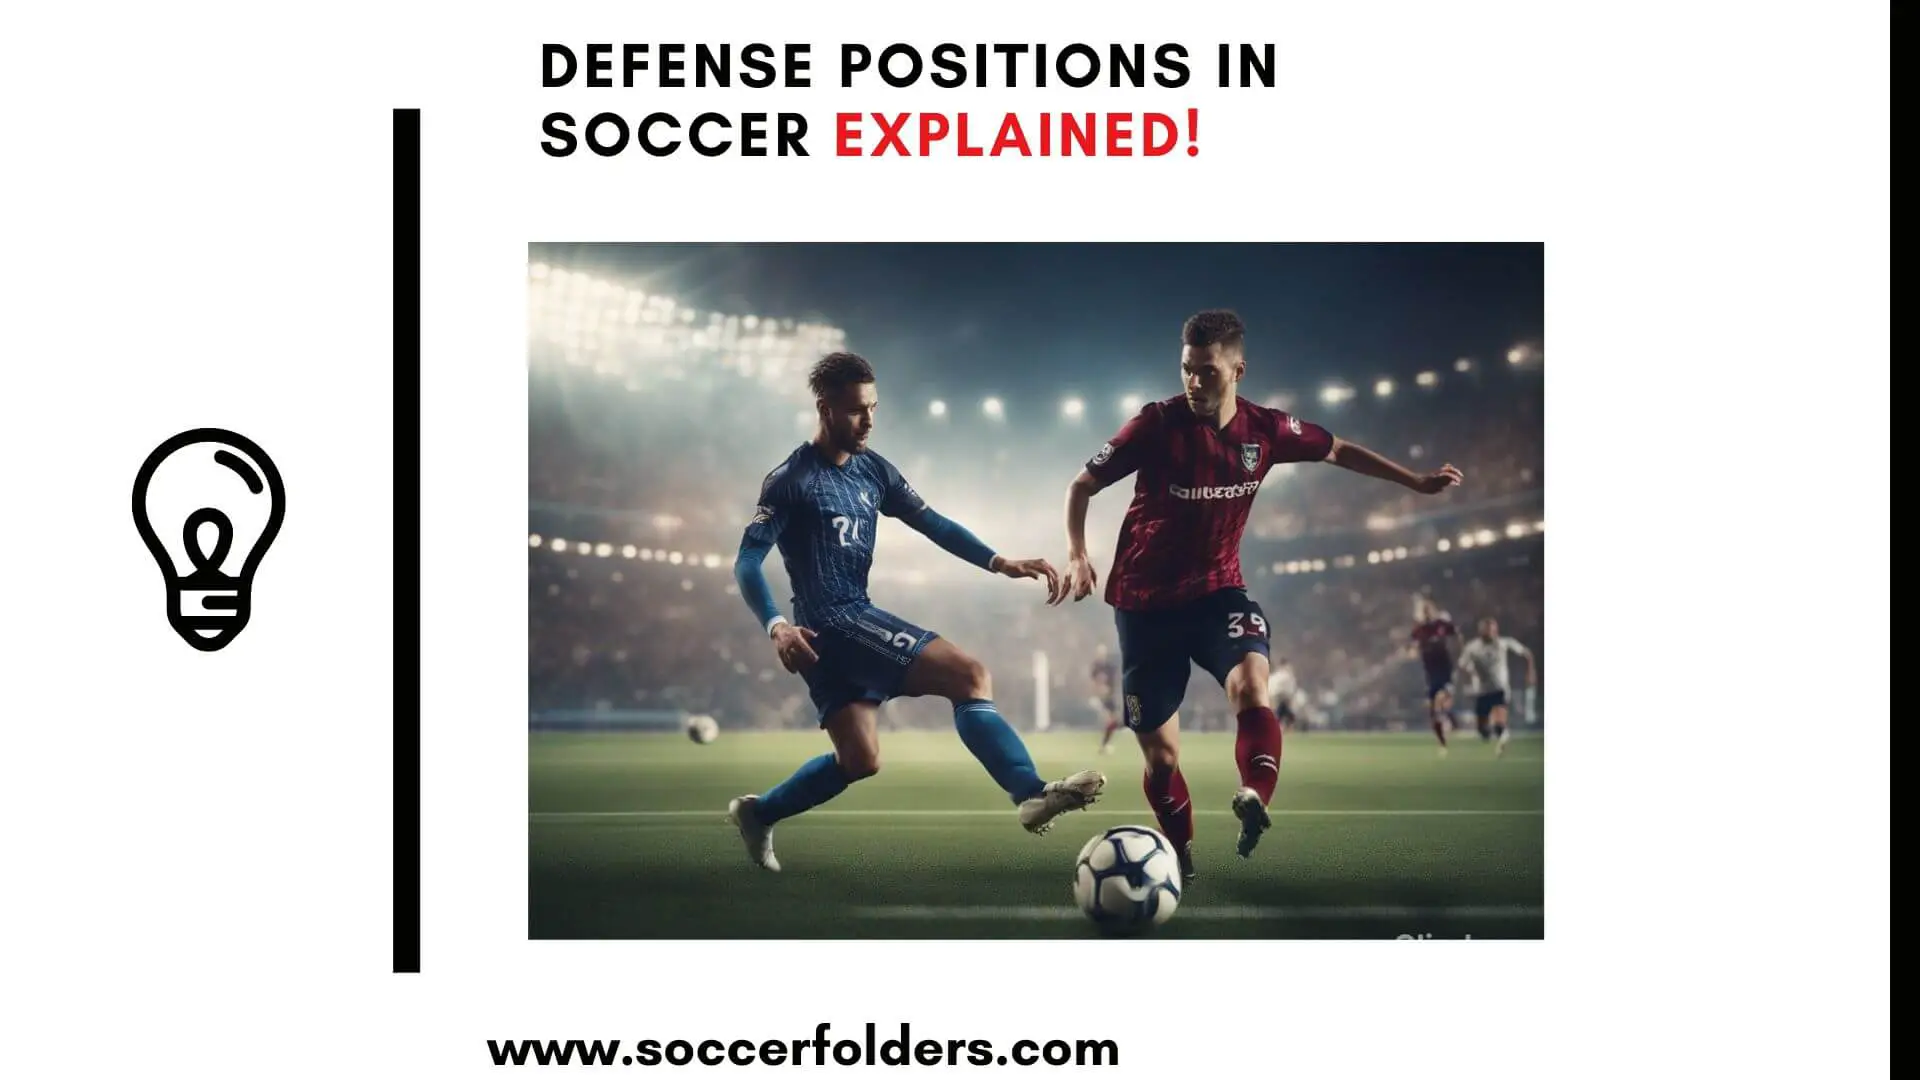 Defense positions in soccer - Featured image